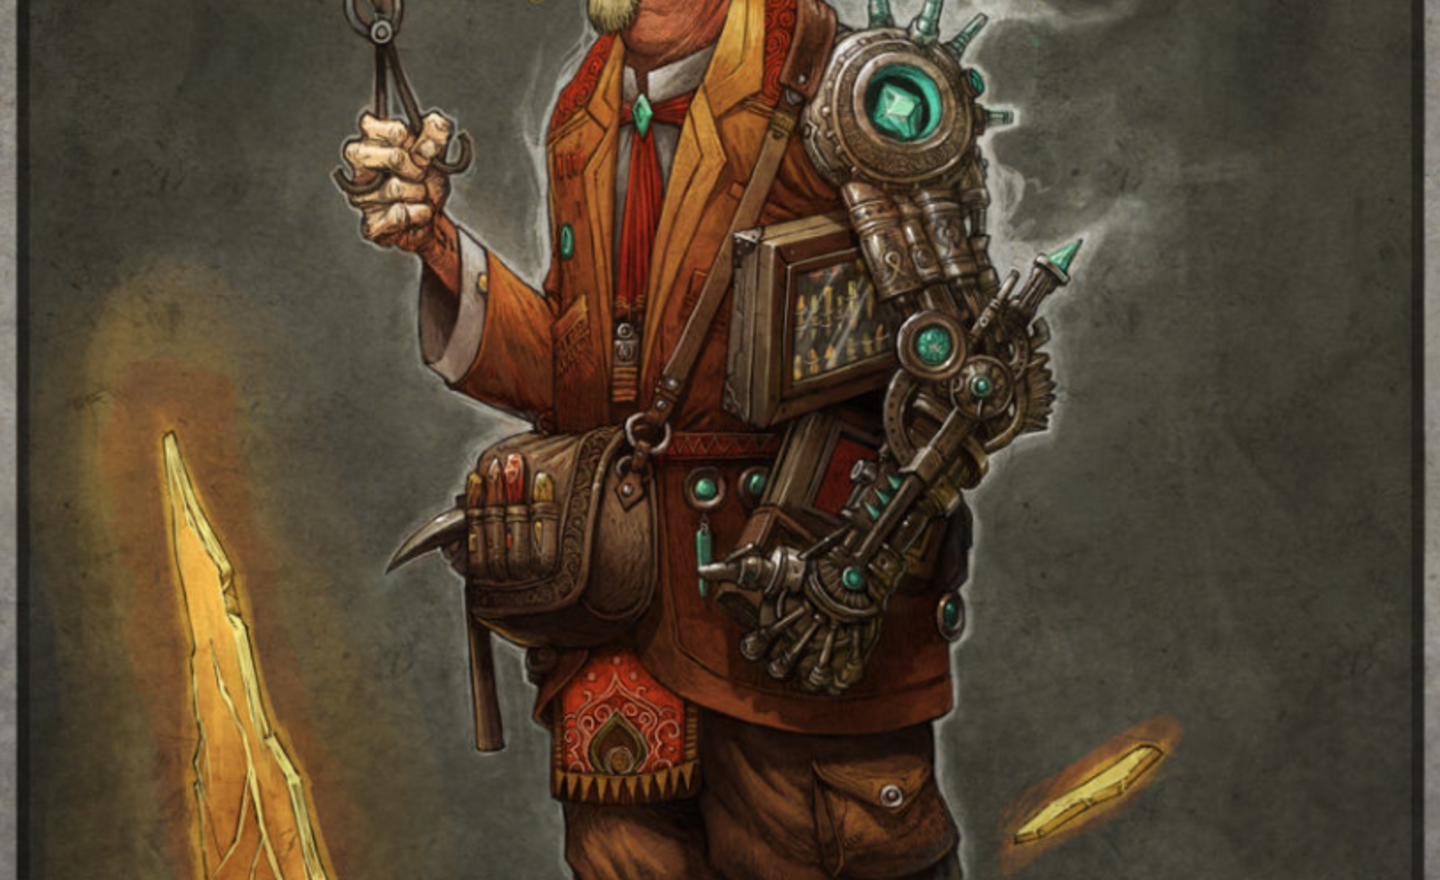 Image of The Geomancer